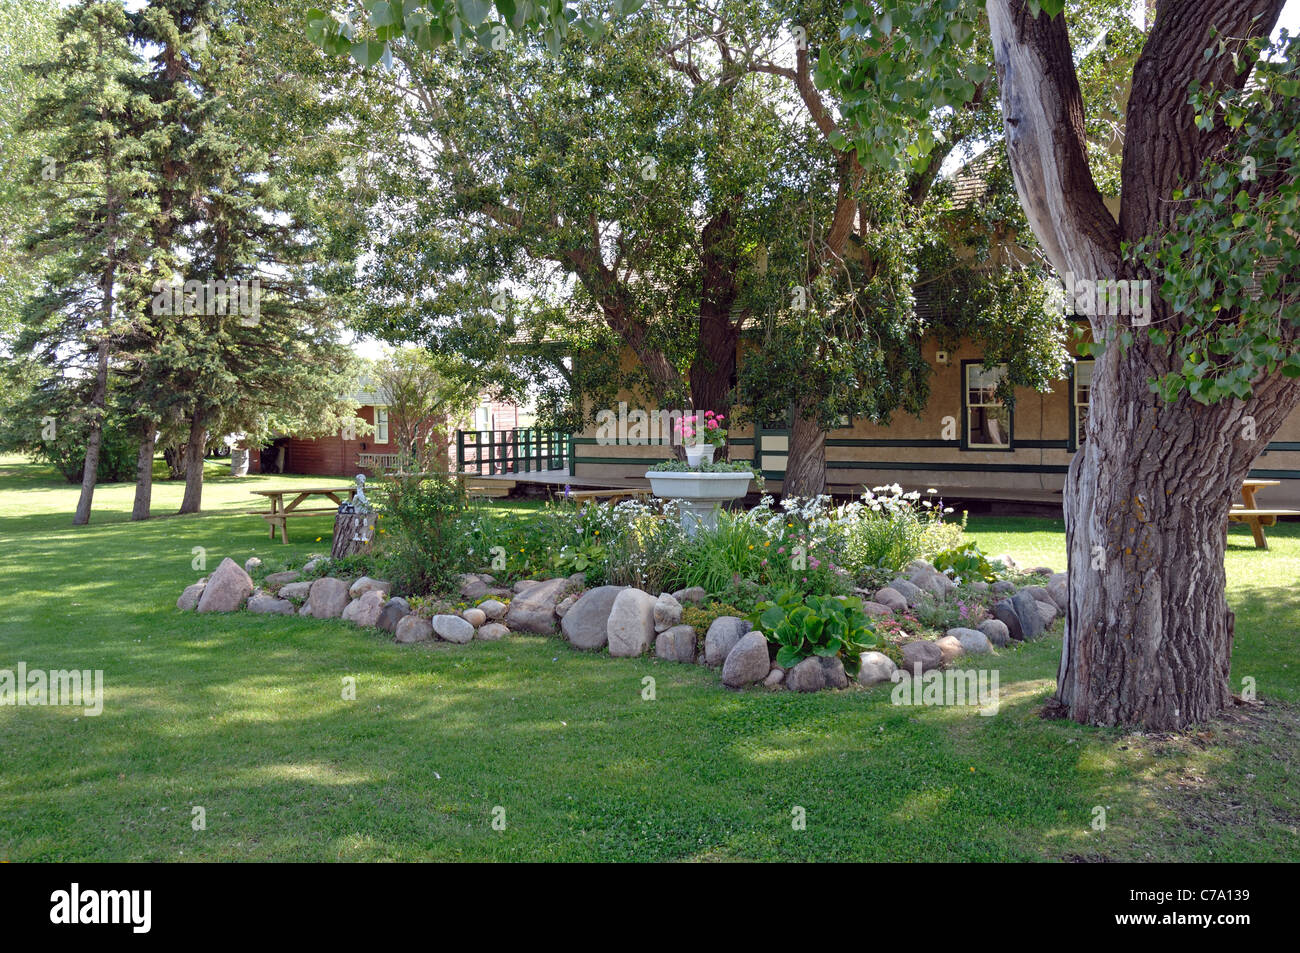 An old western railway station grounds and gardens located in Big Valley, Alberta, Canada. Stock Photo